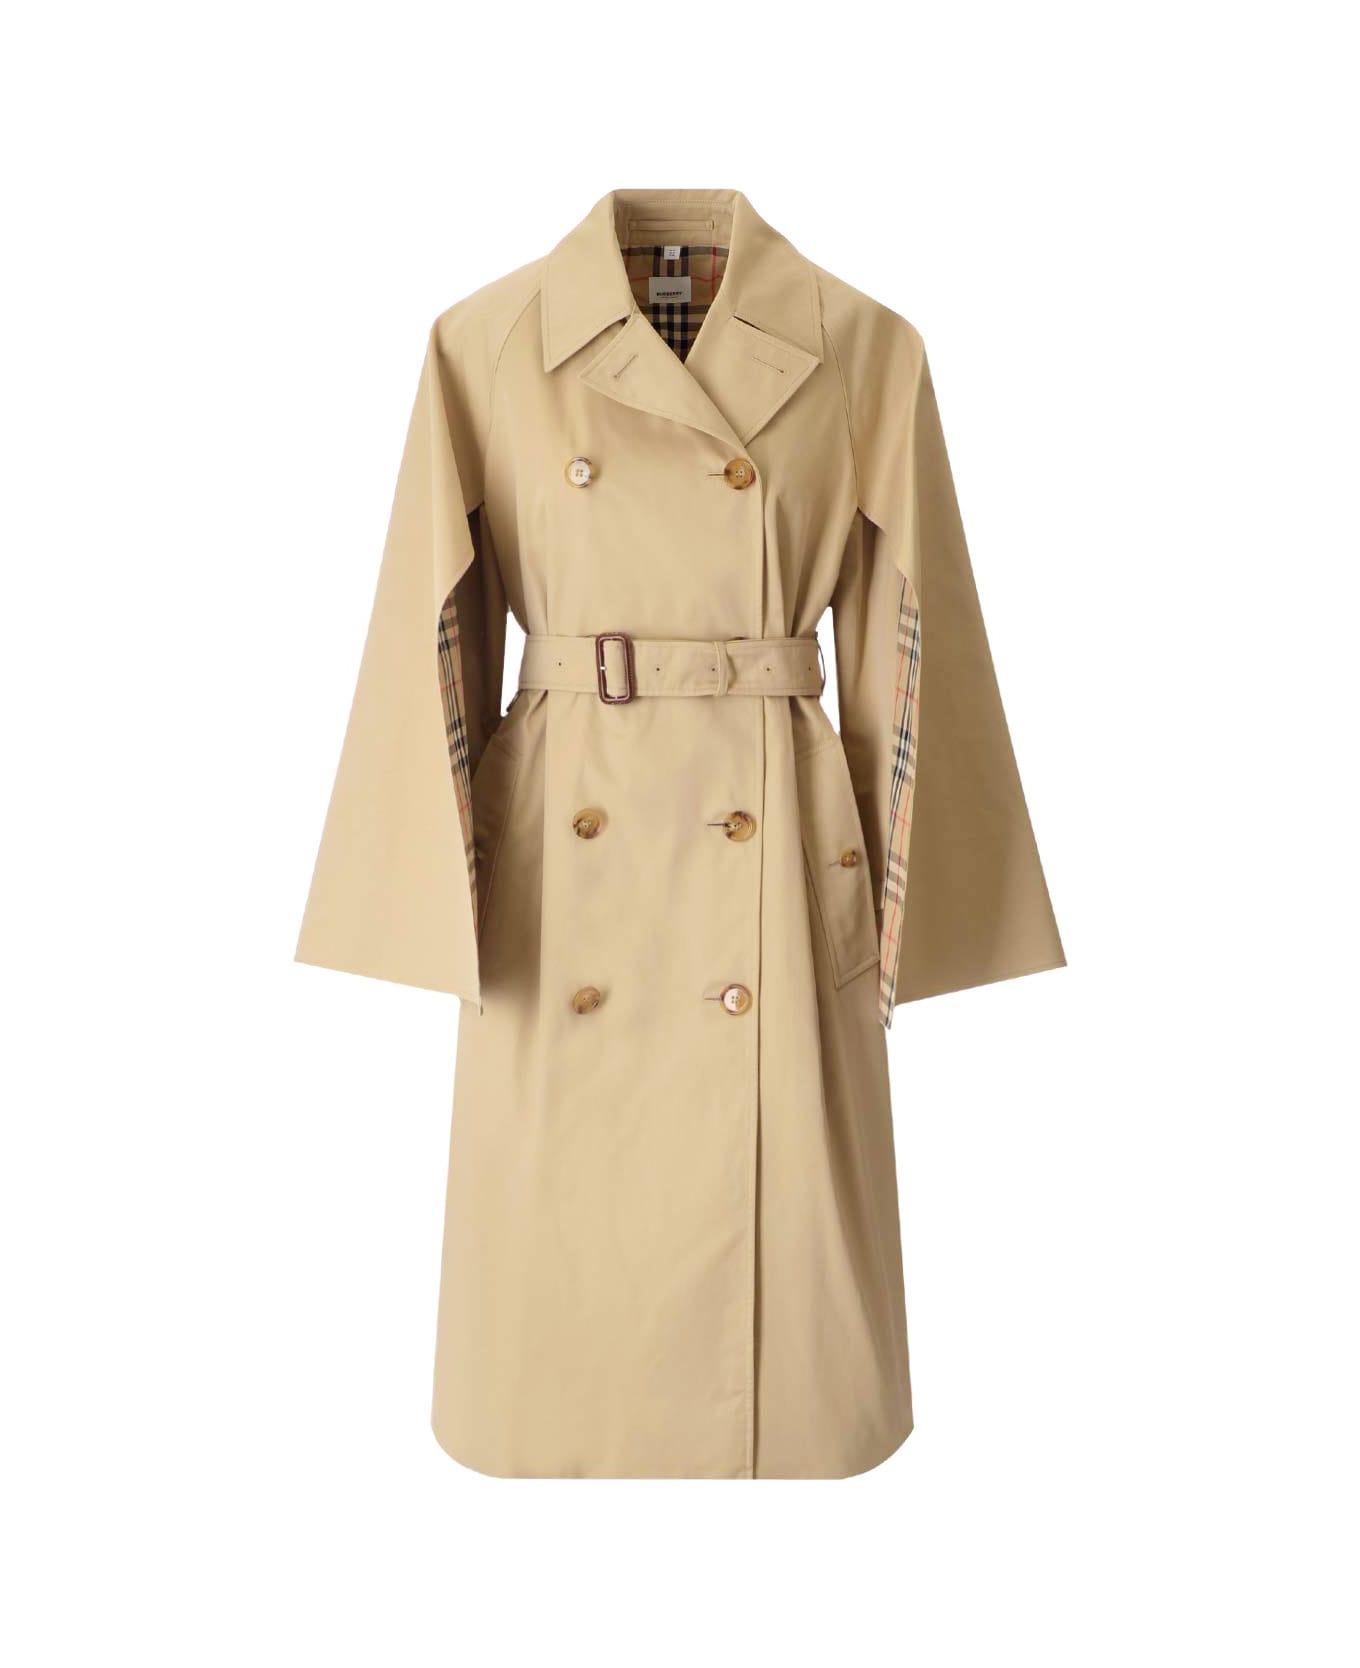 Burberry Trench Coat With Cape Sleeves - Beige